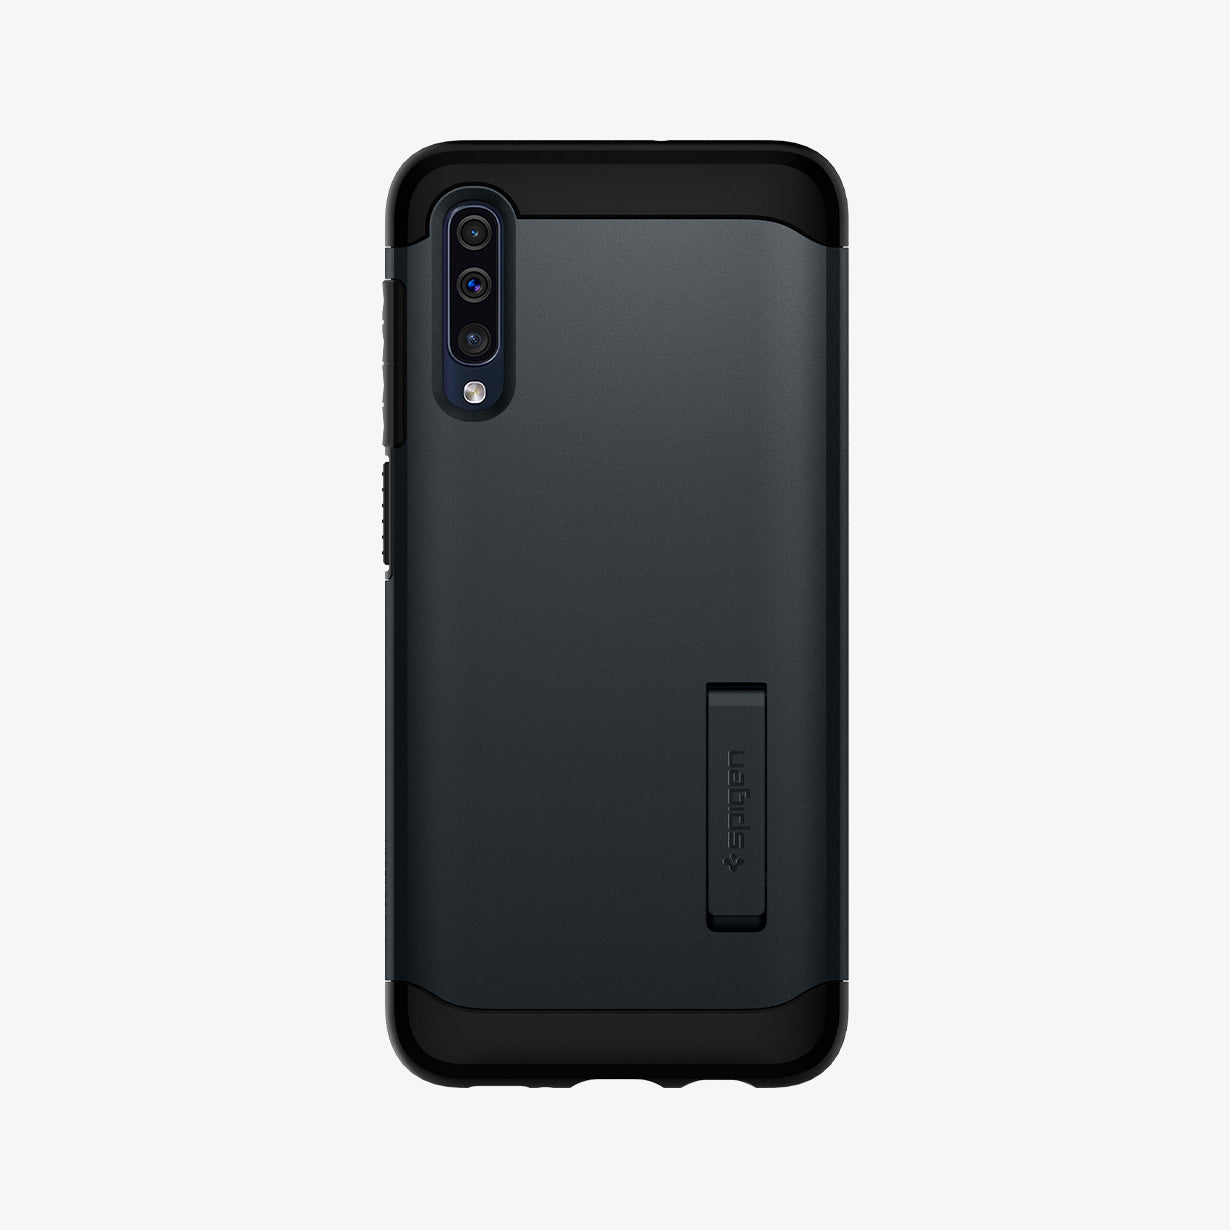 611CS26021 - Galaxy A50 Case Slim Armor in Metal Slate showing the back